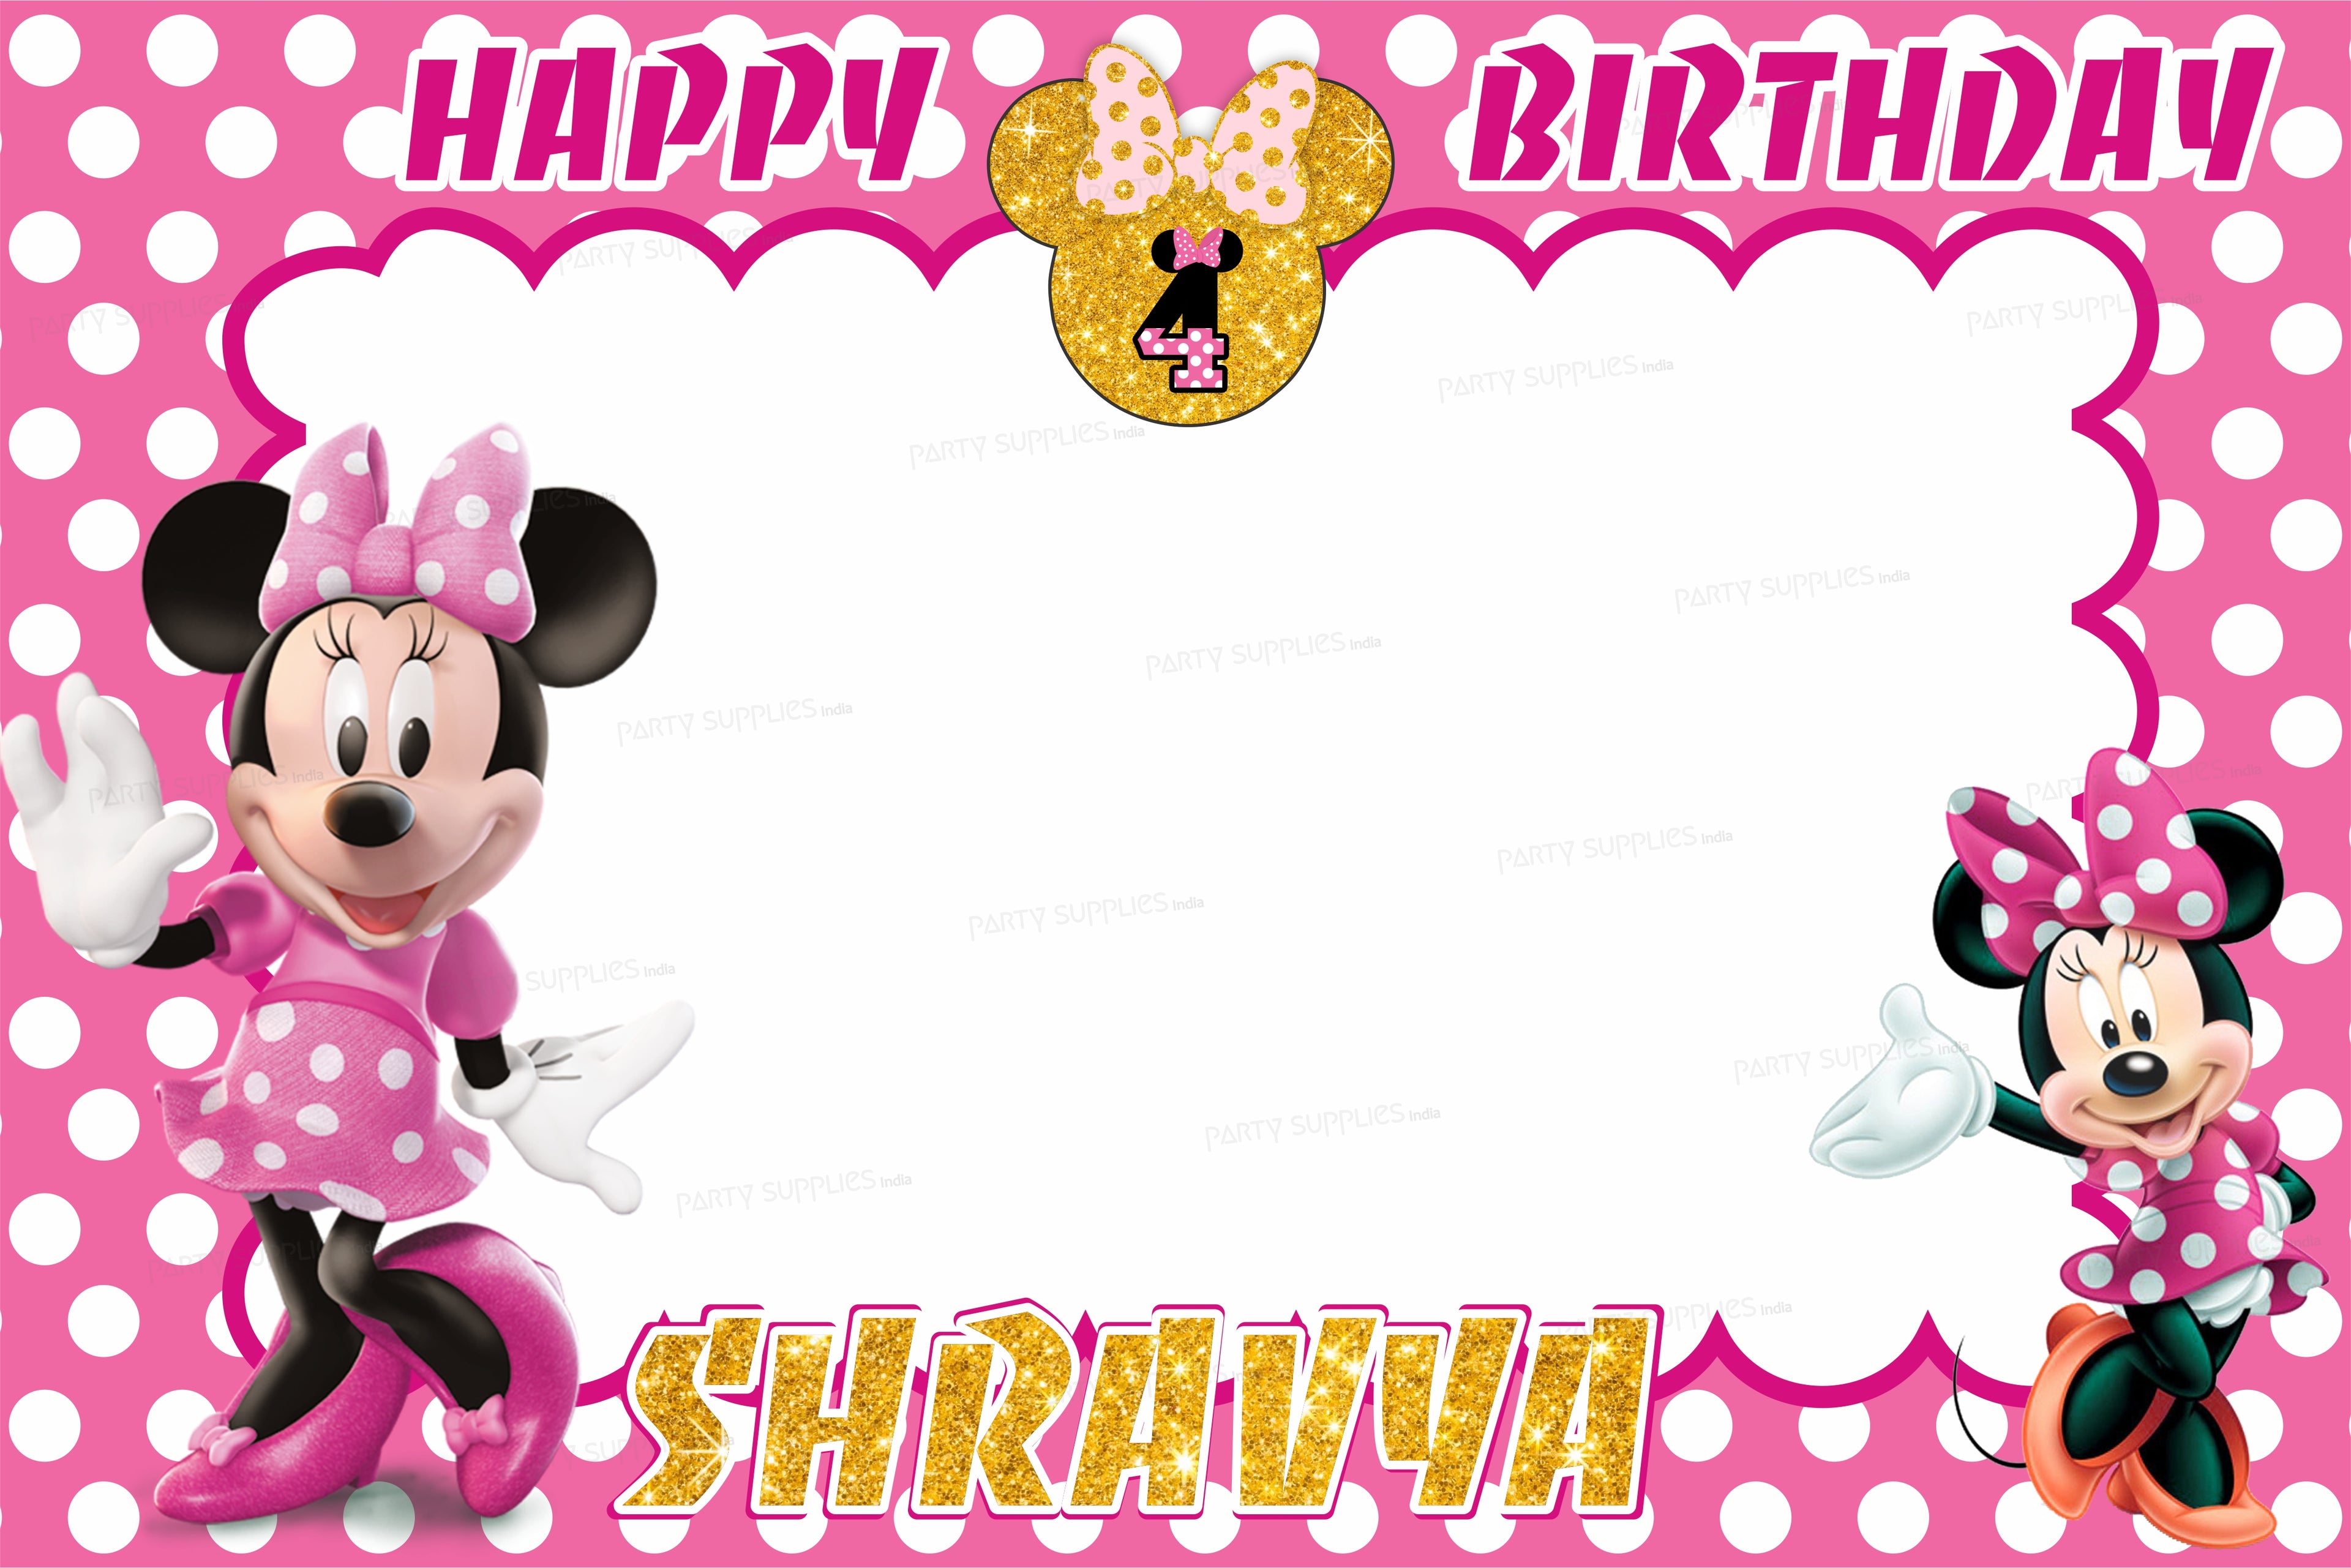 Minnie Mouse Theme with Baby Name Photobooth